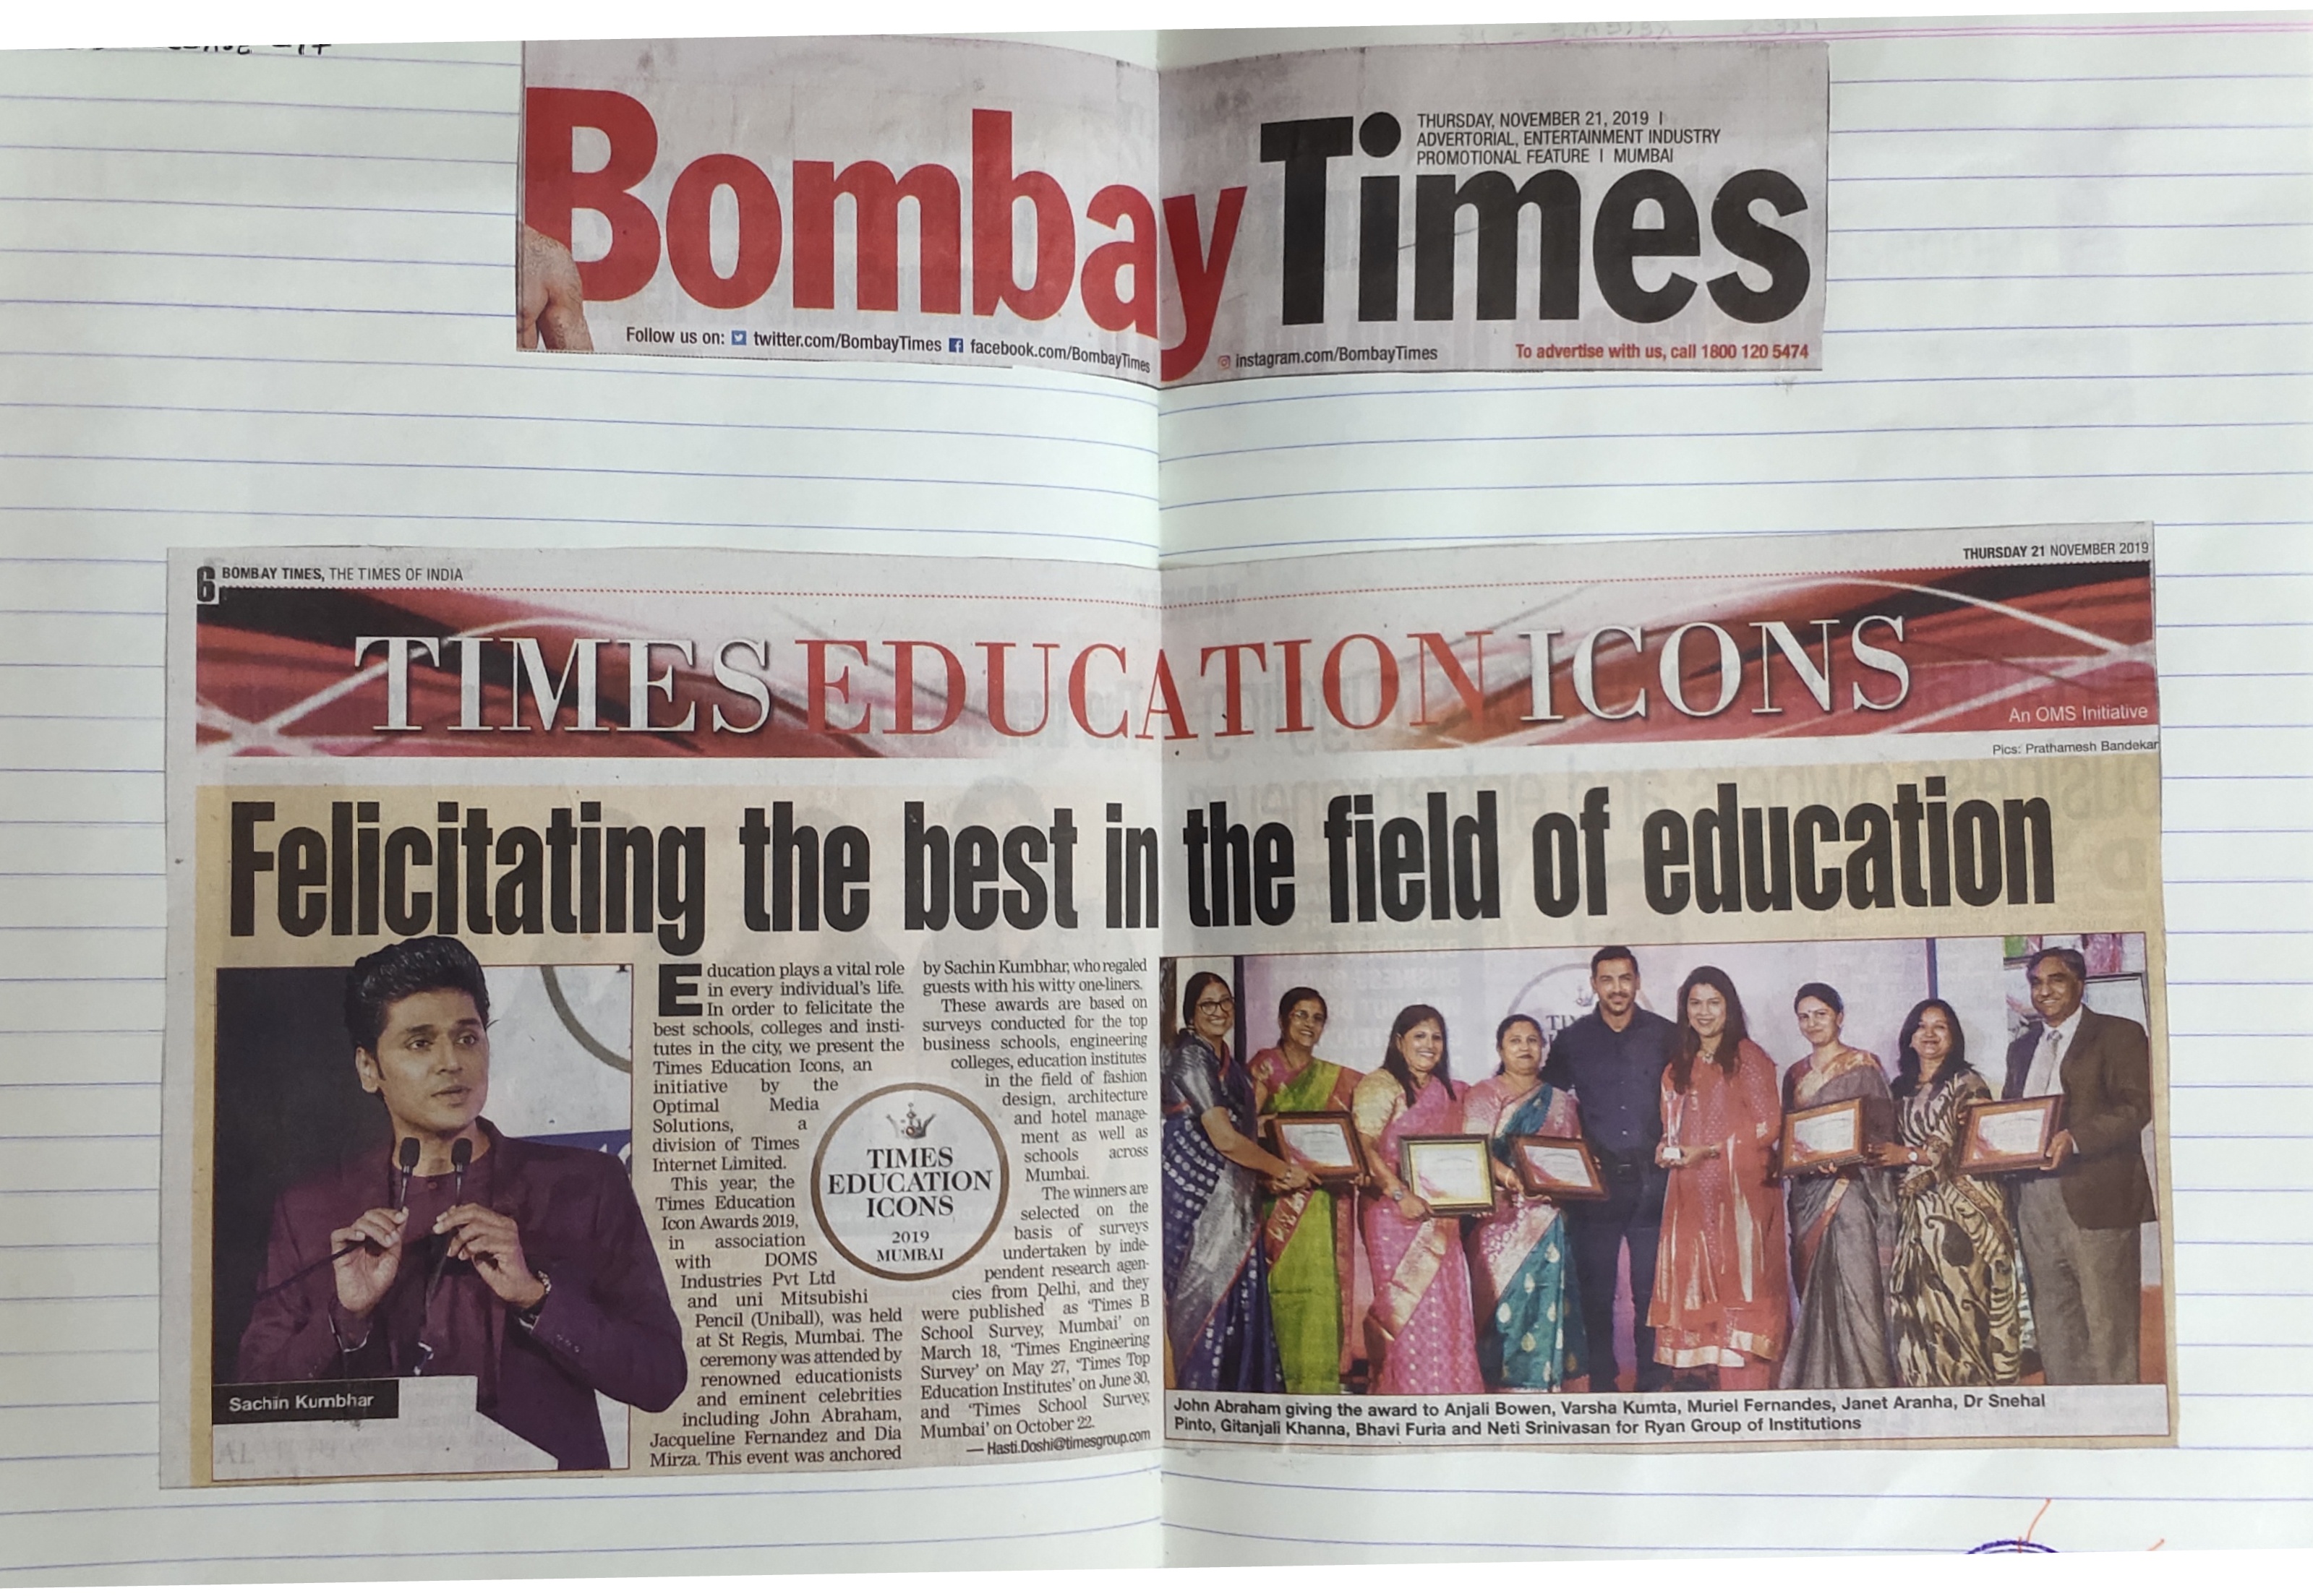 An article under the name “Times Educations Icons” was published in the Bombay Times